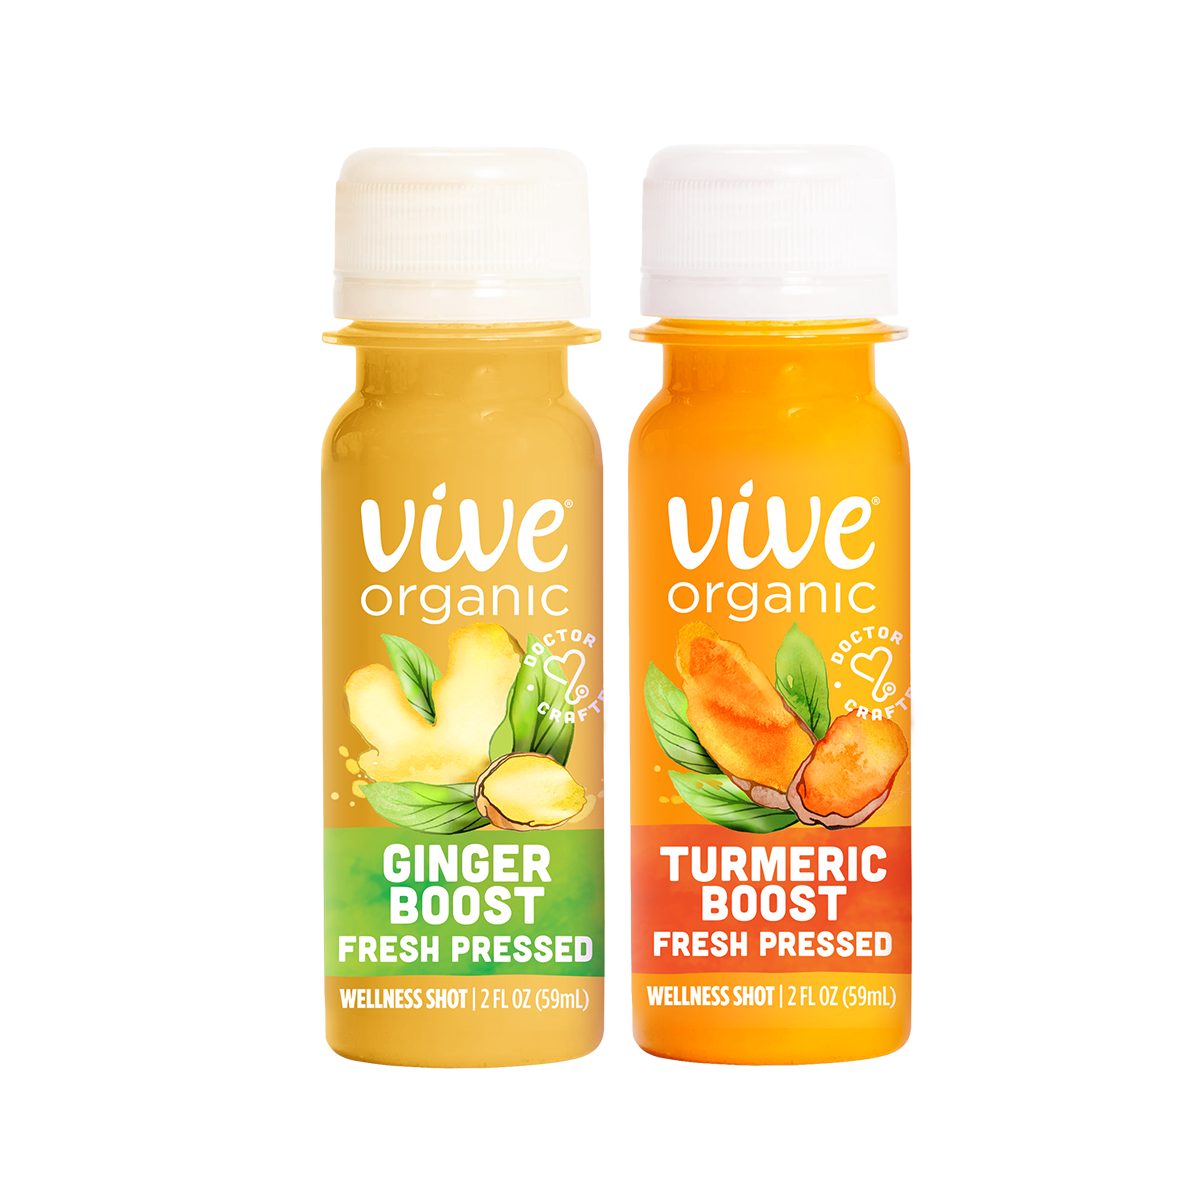 GINGER AND TURMERIC PURE BOOST VARIETY PACK